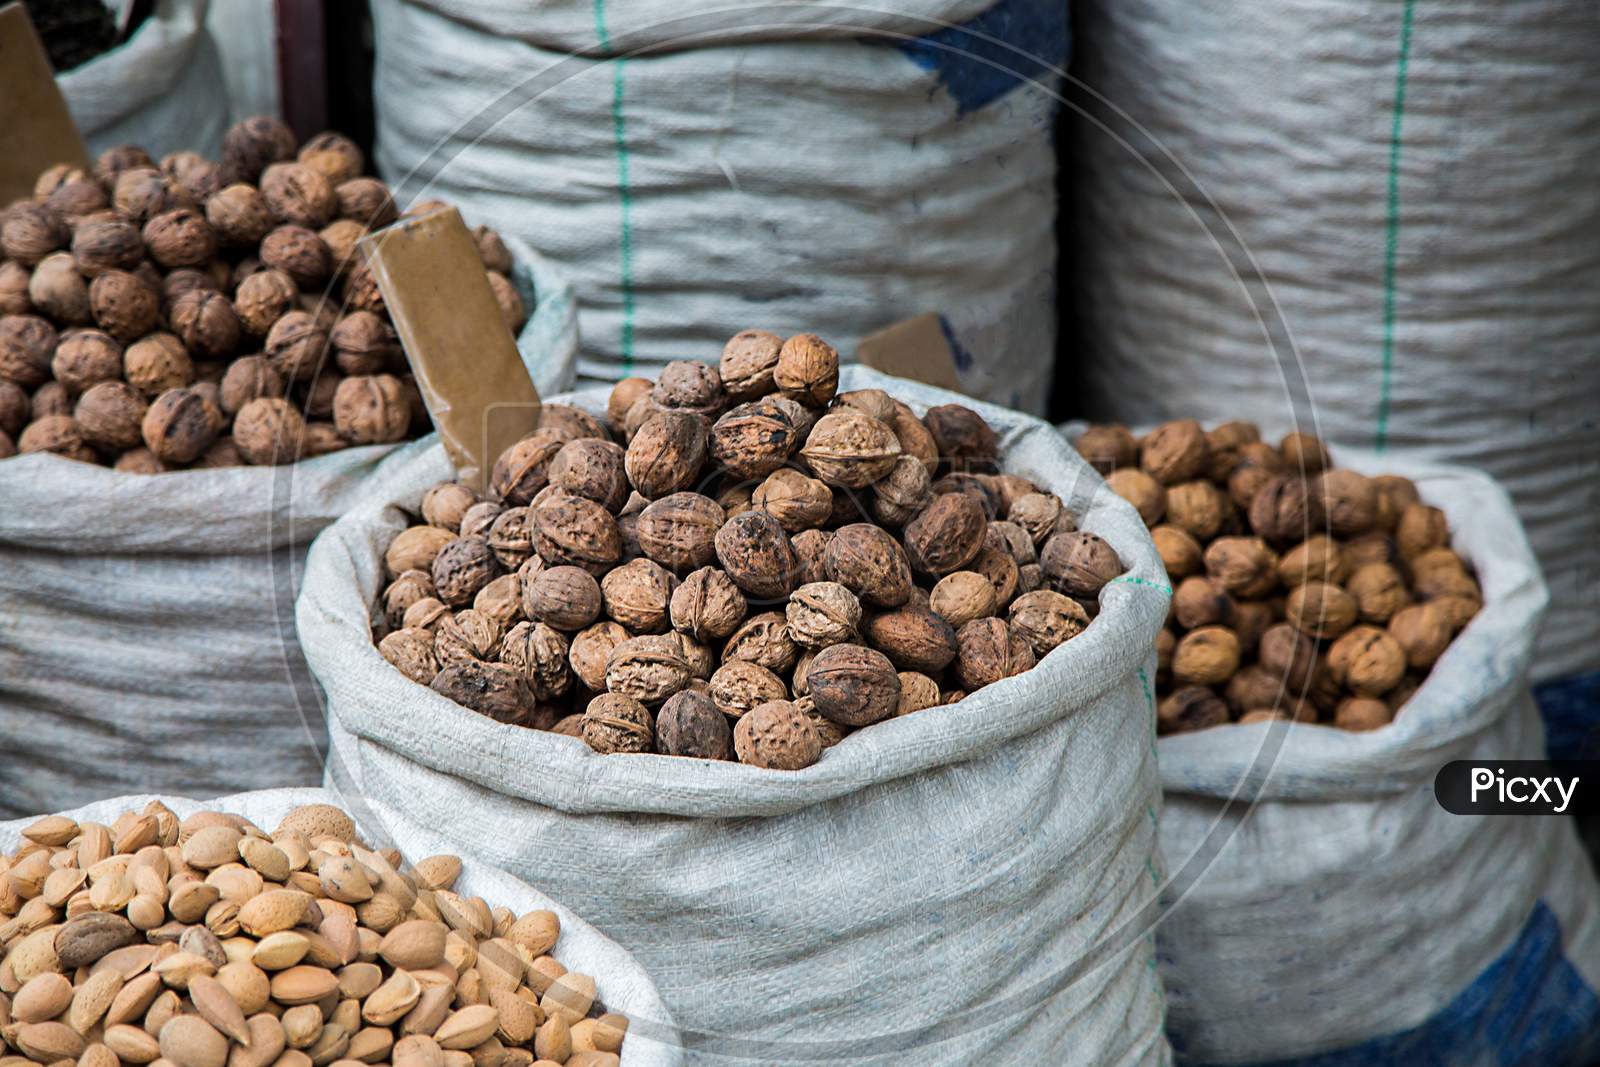 Walnuts And Pistachios For Sale At Market In White Sacks , Variety Of Dry Fruits Displayed Outside The Shop - Image